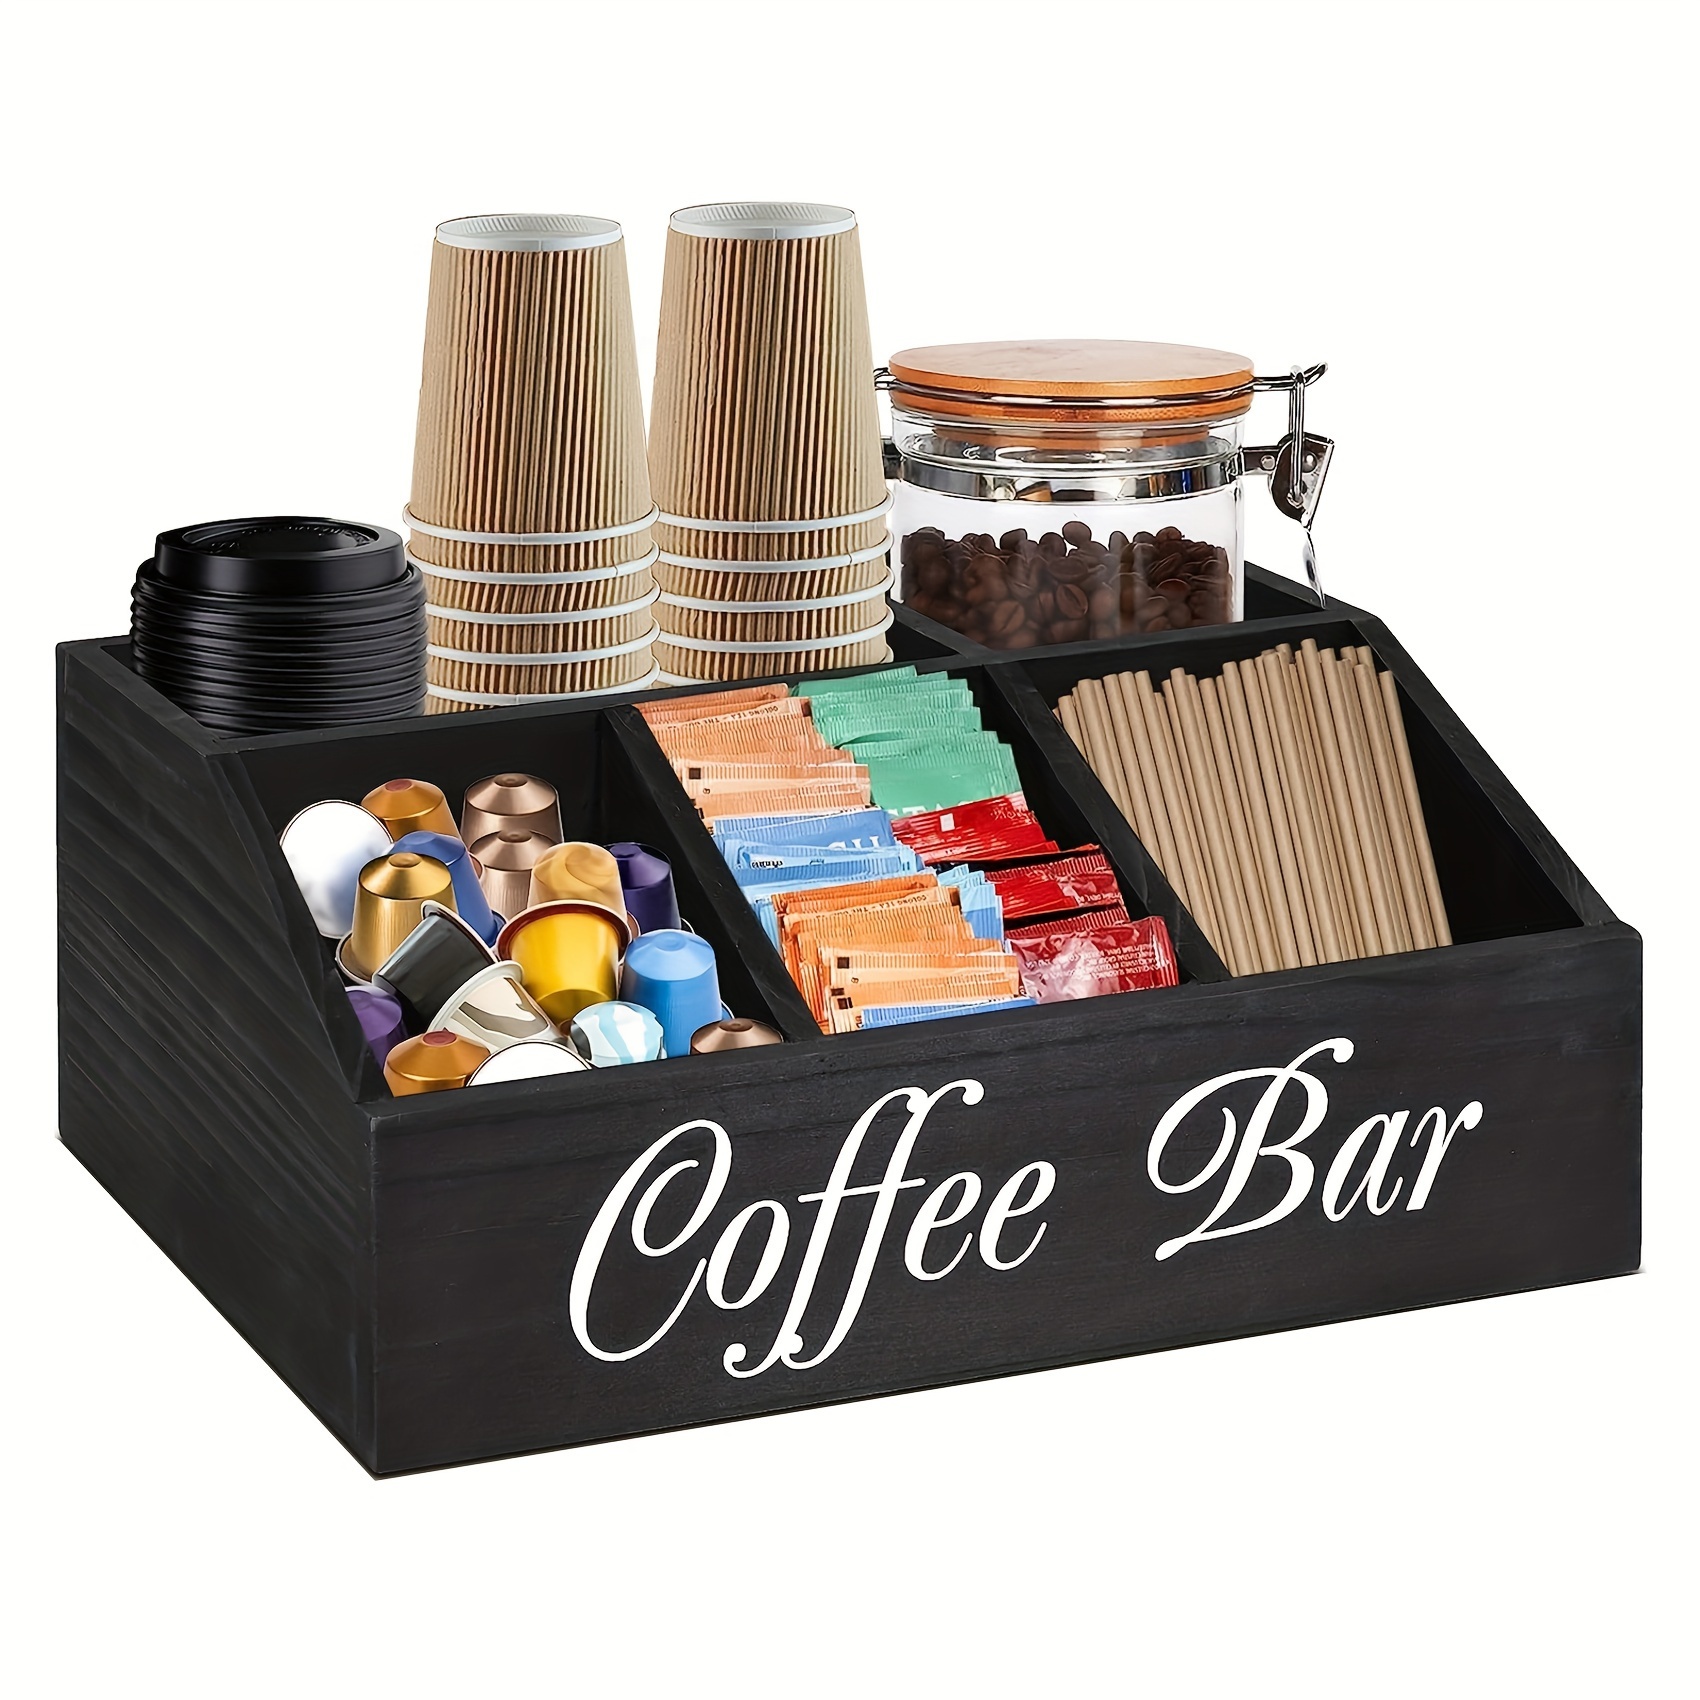 

Wood Coffee Station Organizer Tray - Rectangle Multipurpose Non-waterproof Storage Basket With , Pod Storage, And Accessory Organization For Coffee Bar Decor